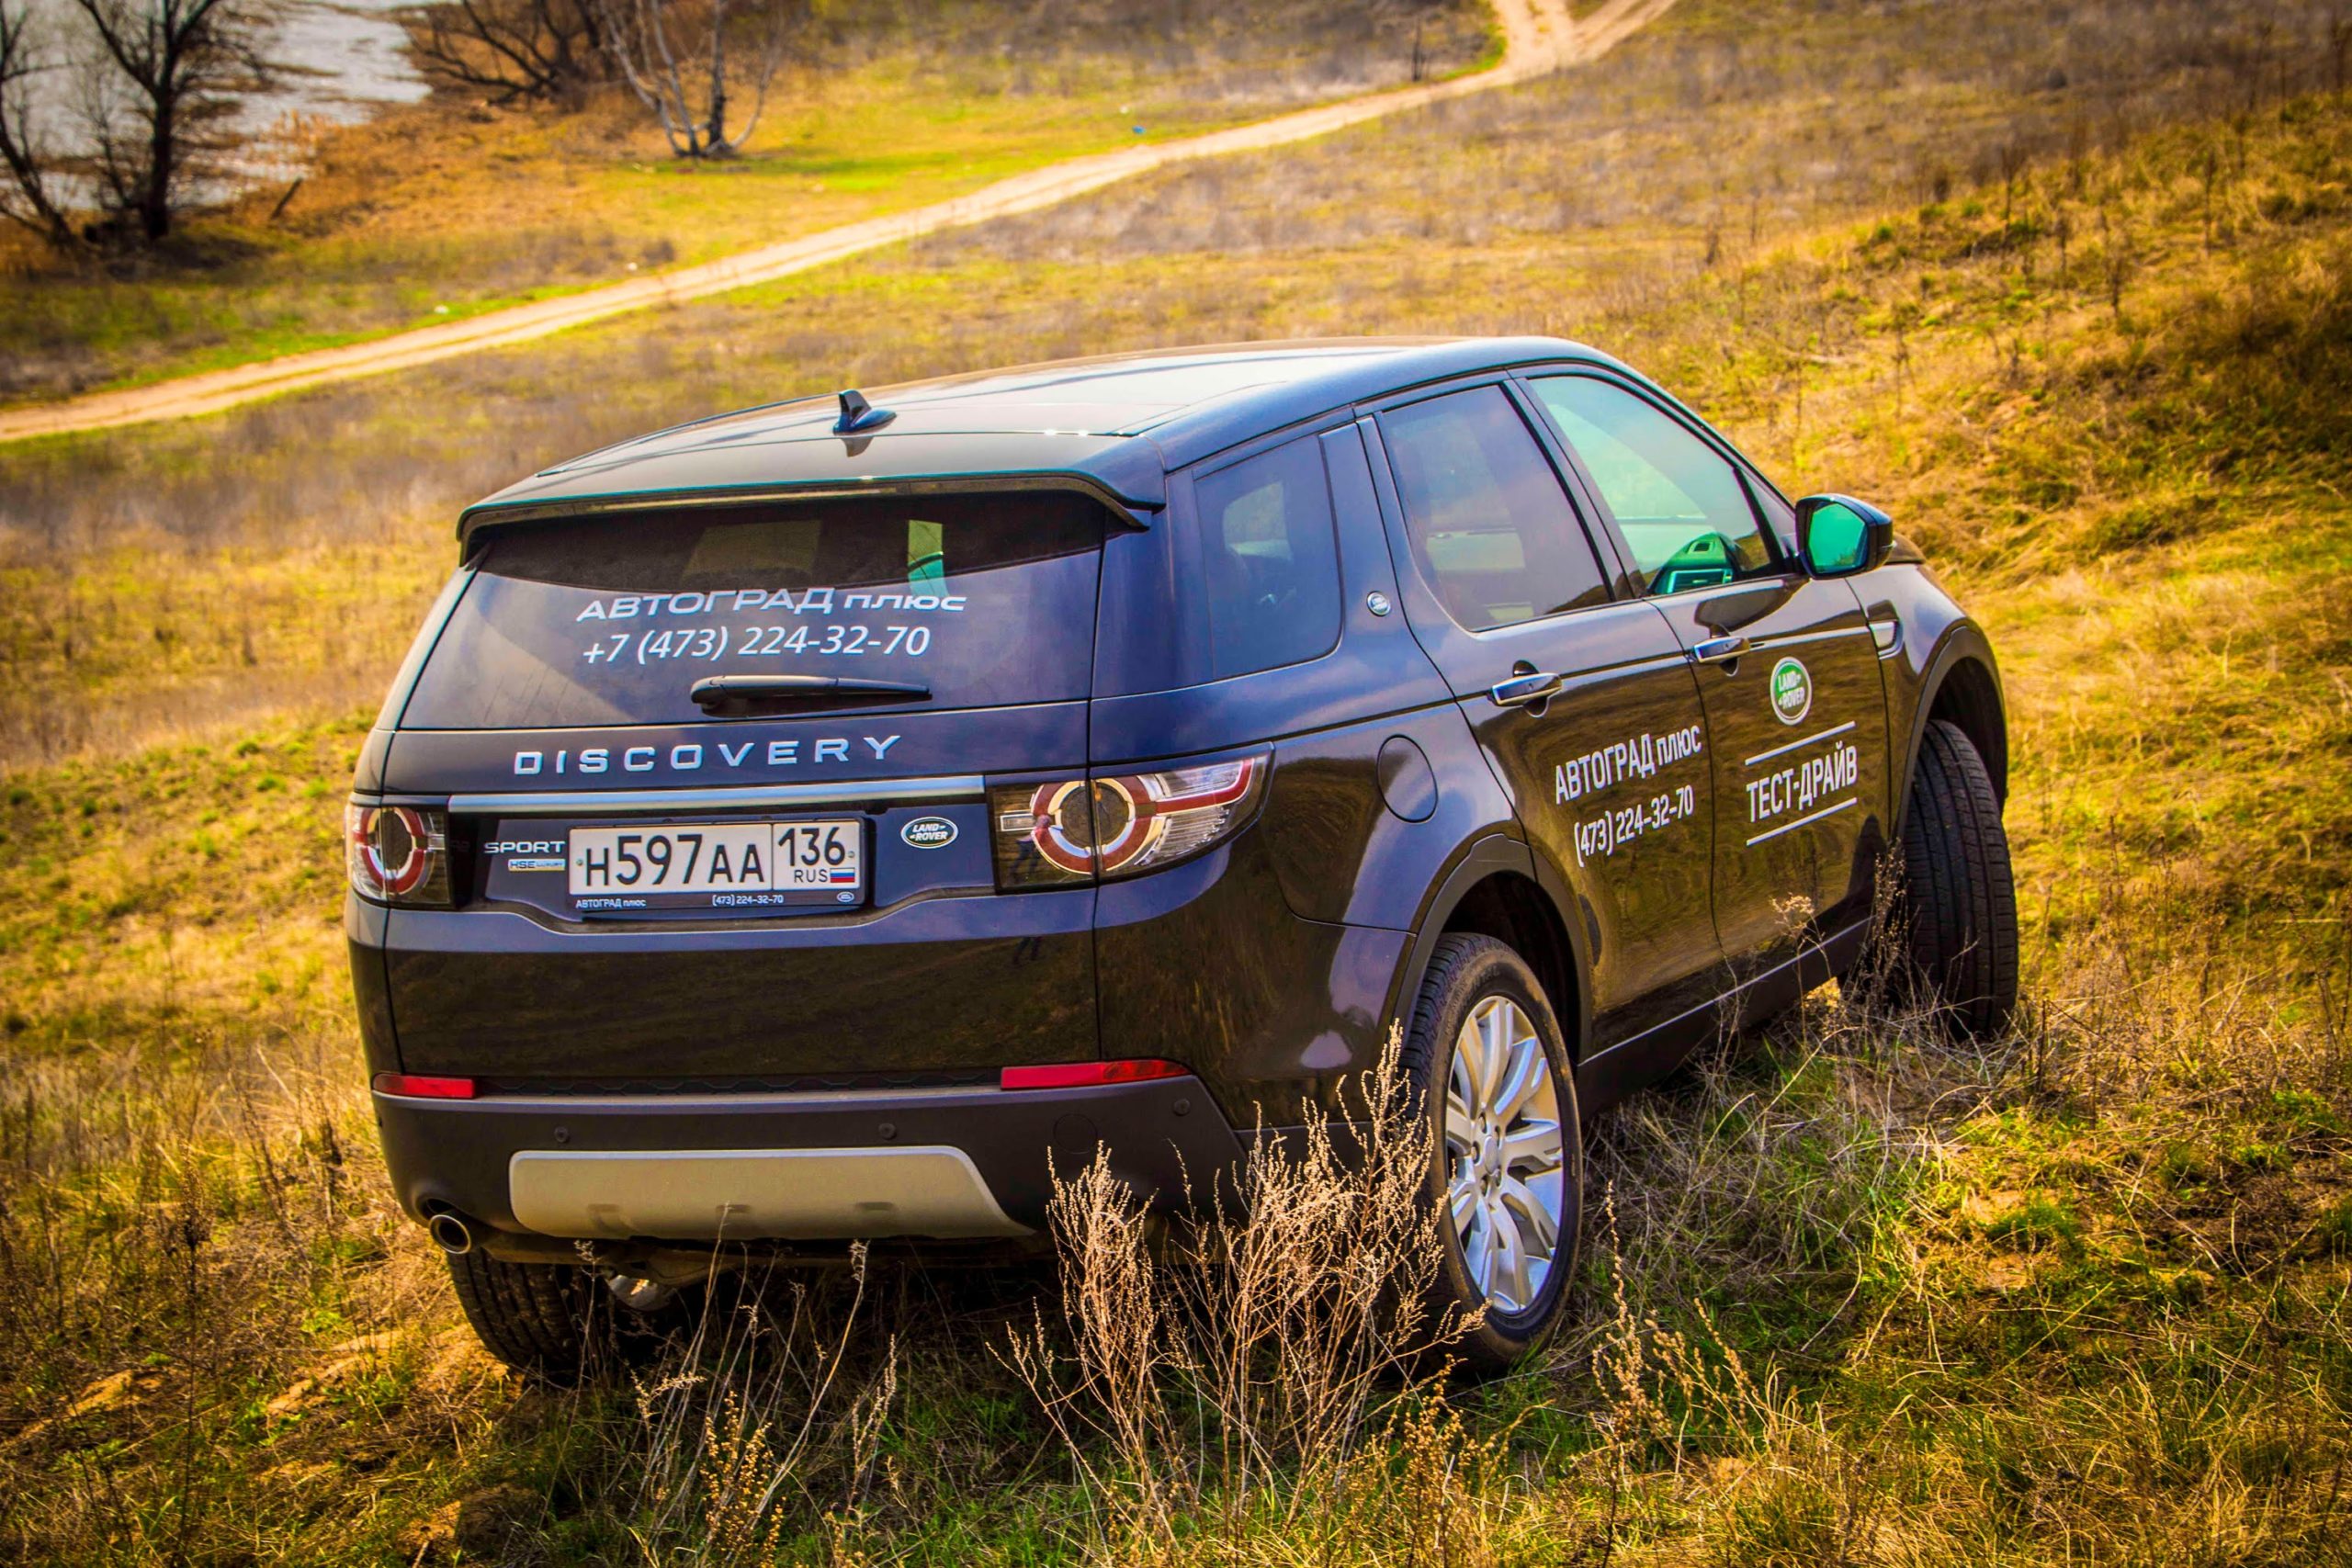 Land Rover Discovery Sport 2. Range Rover Discovery Sport 2015. Дискавери Рендж Ровер 2 2015. Ленд Ровер Дискавери спорт 2017. Тест дискавери